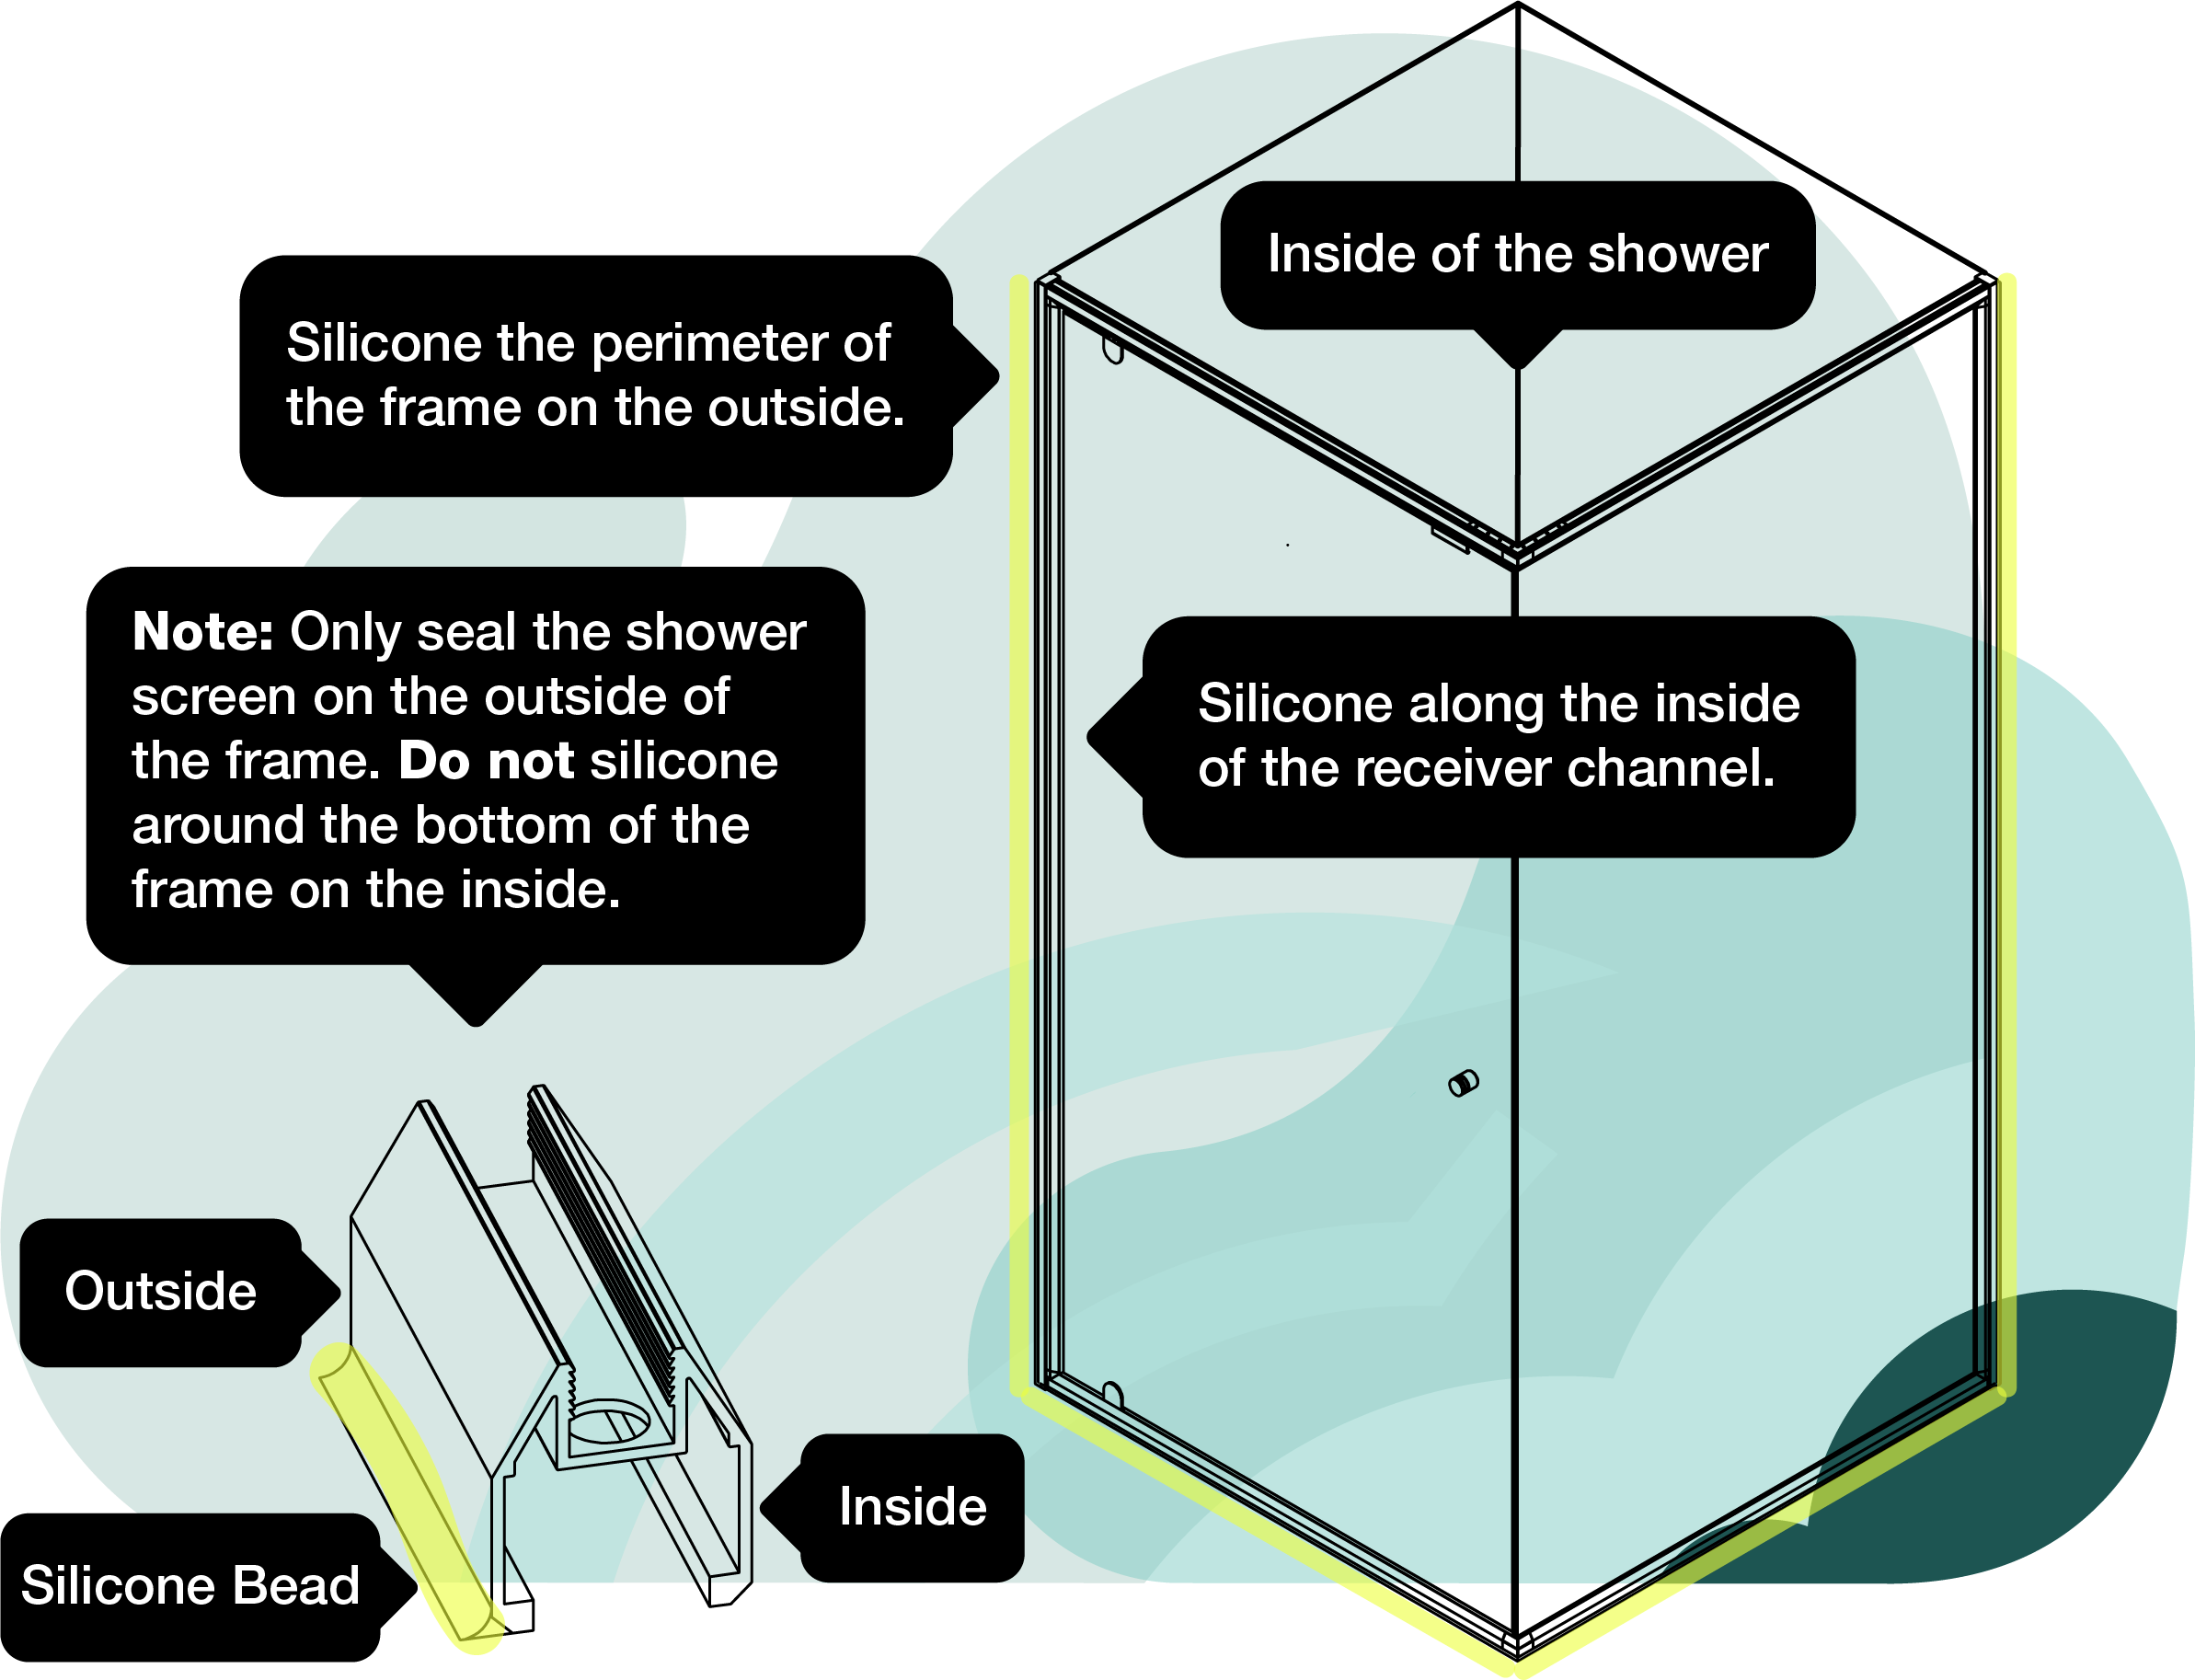 The right way to silicone a shower screen